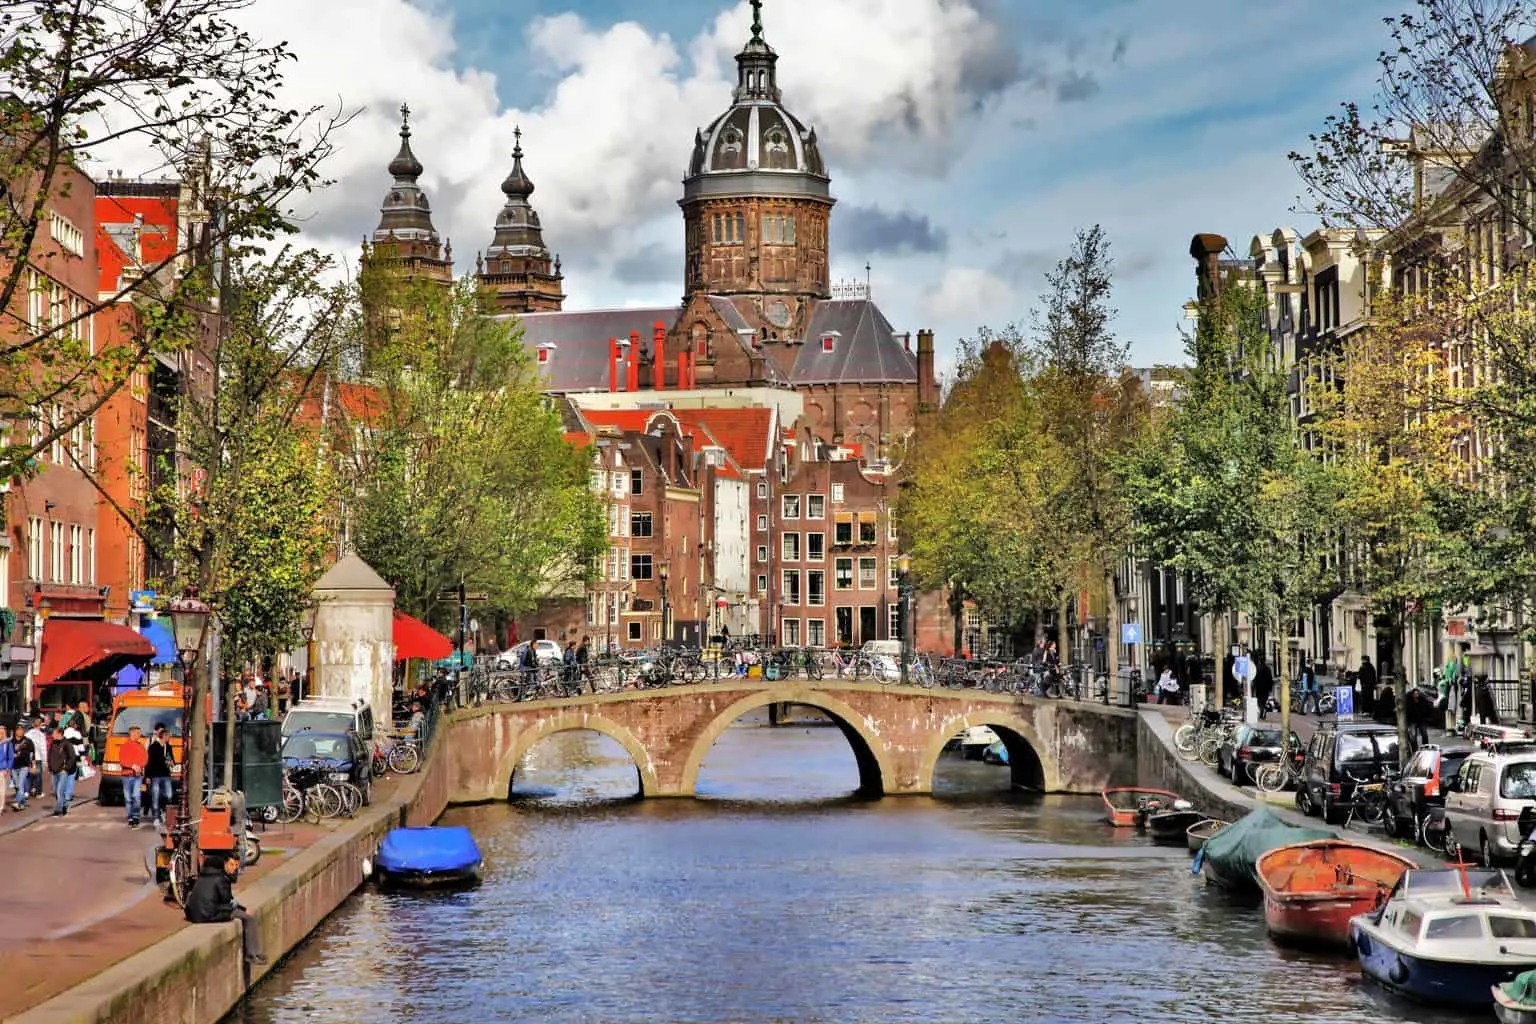 The picturesque beauty of Amsterdam's iconic canals.